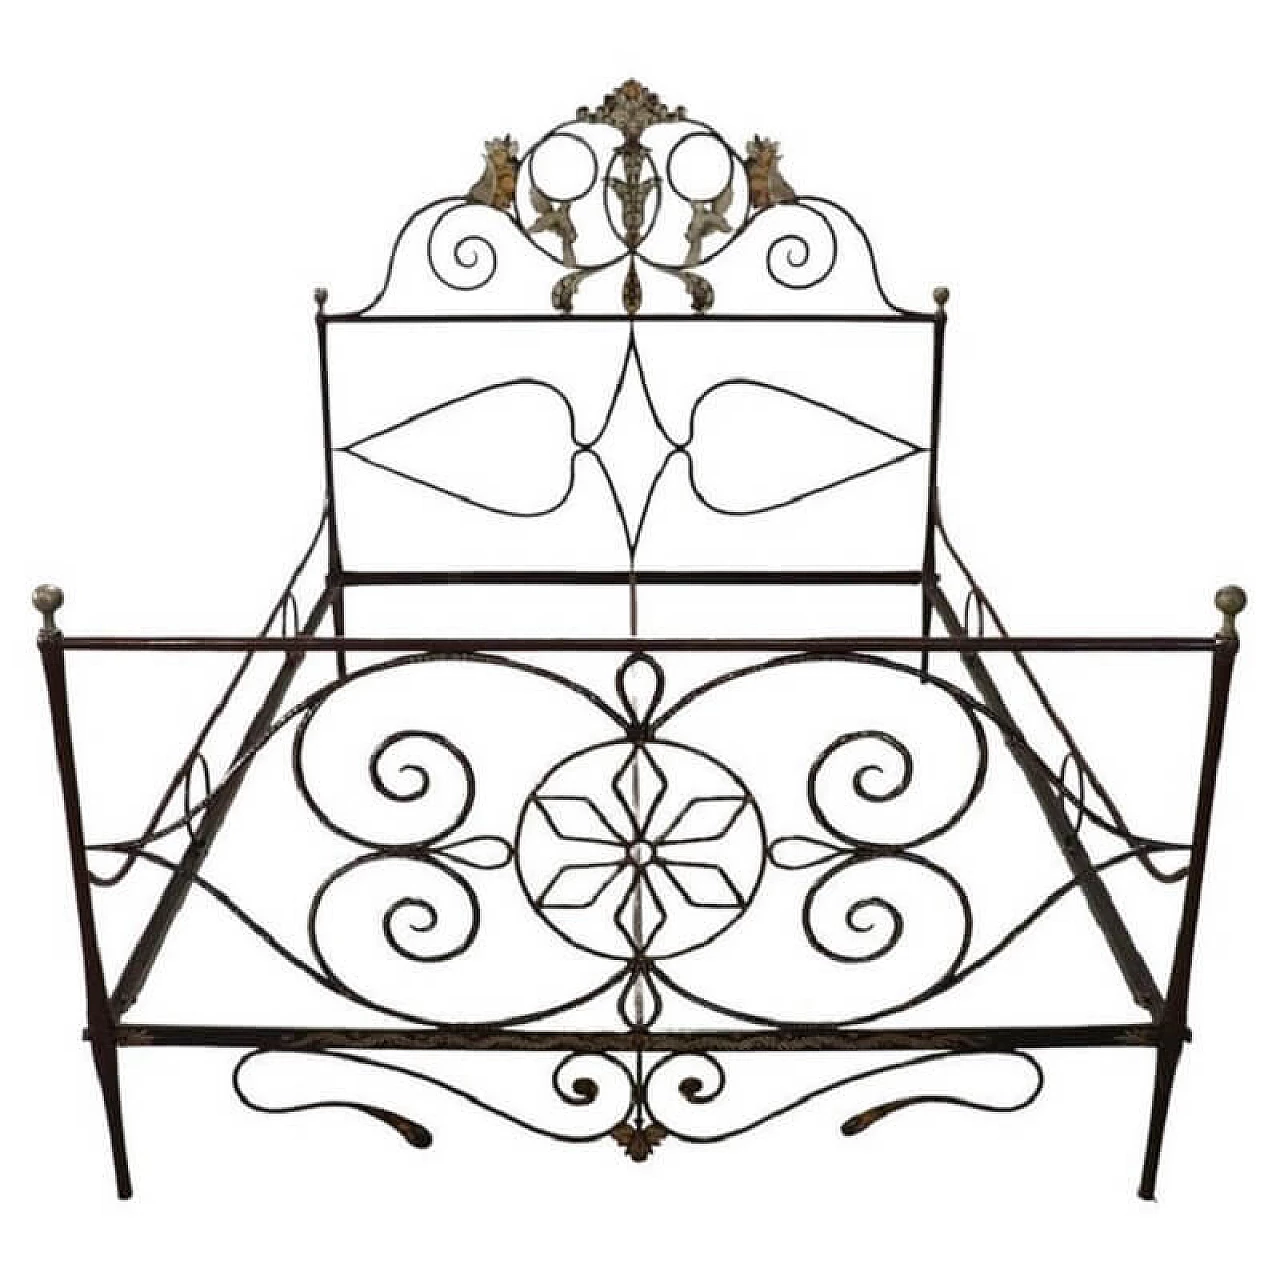 Empire wrought iron bed, early 19th century 1